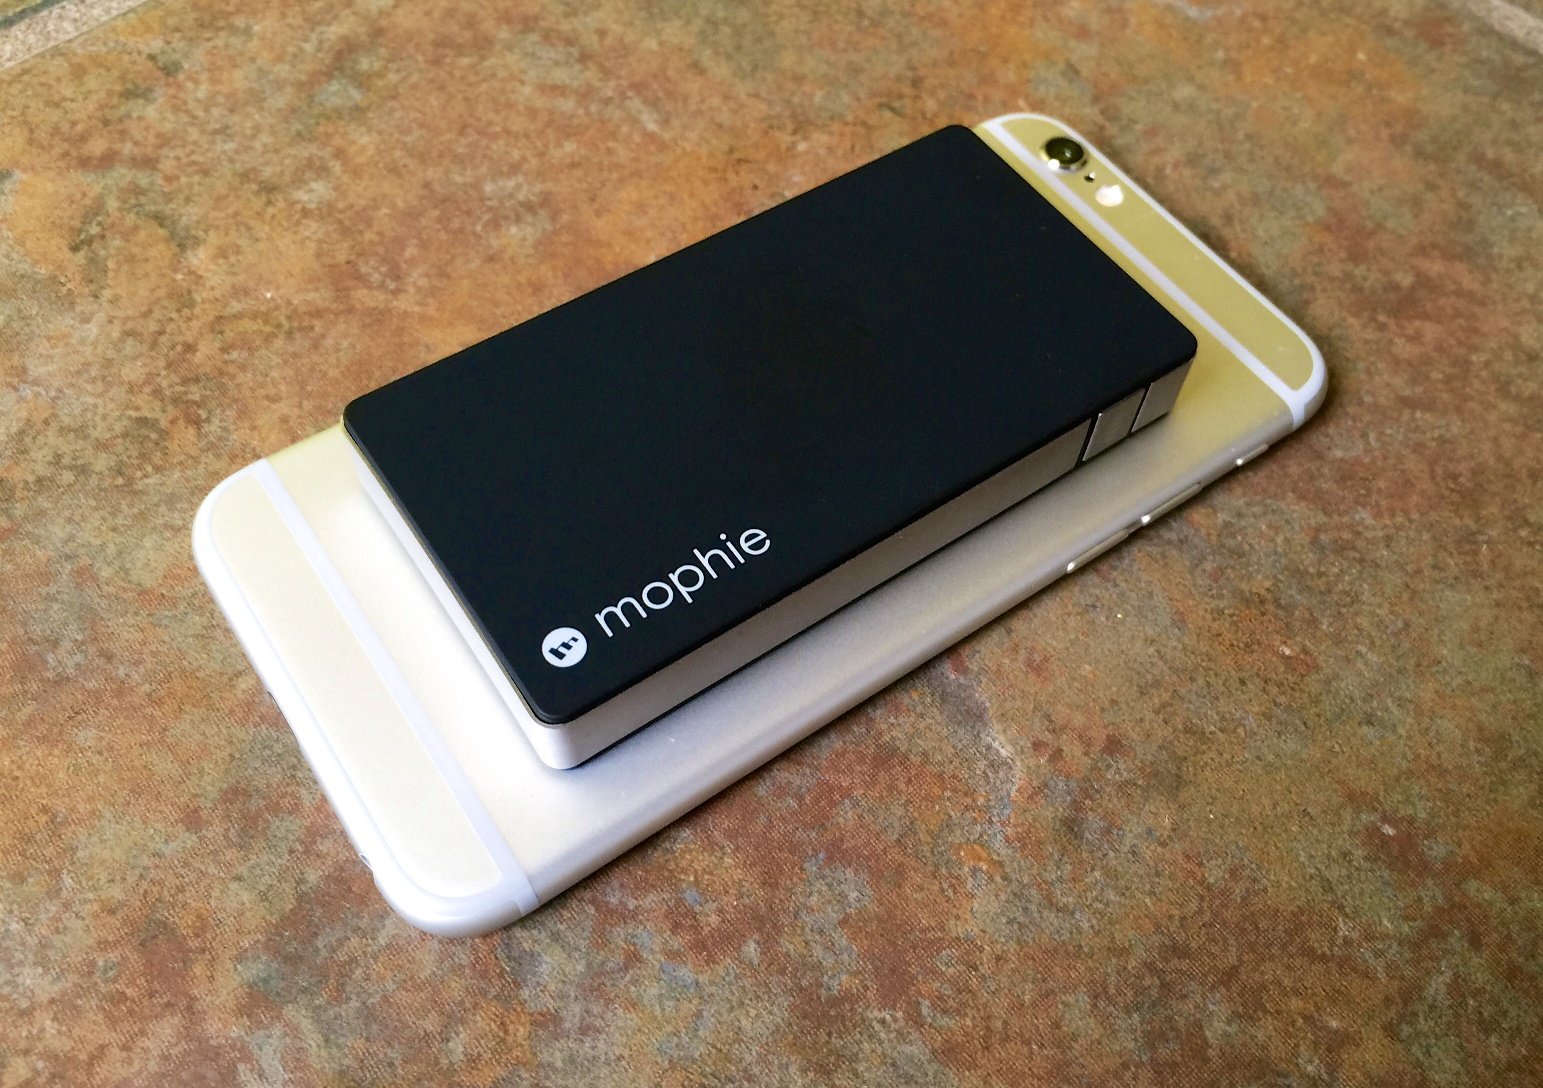 The iPhone 6 Mophie case is more elegant than this external battery option.